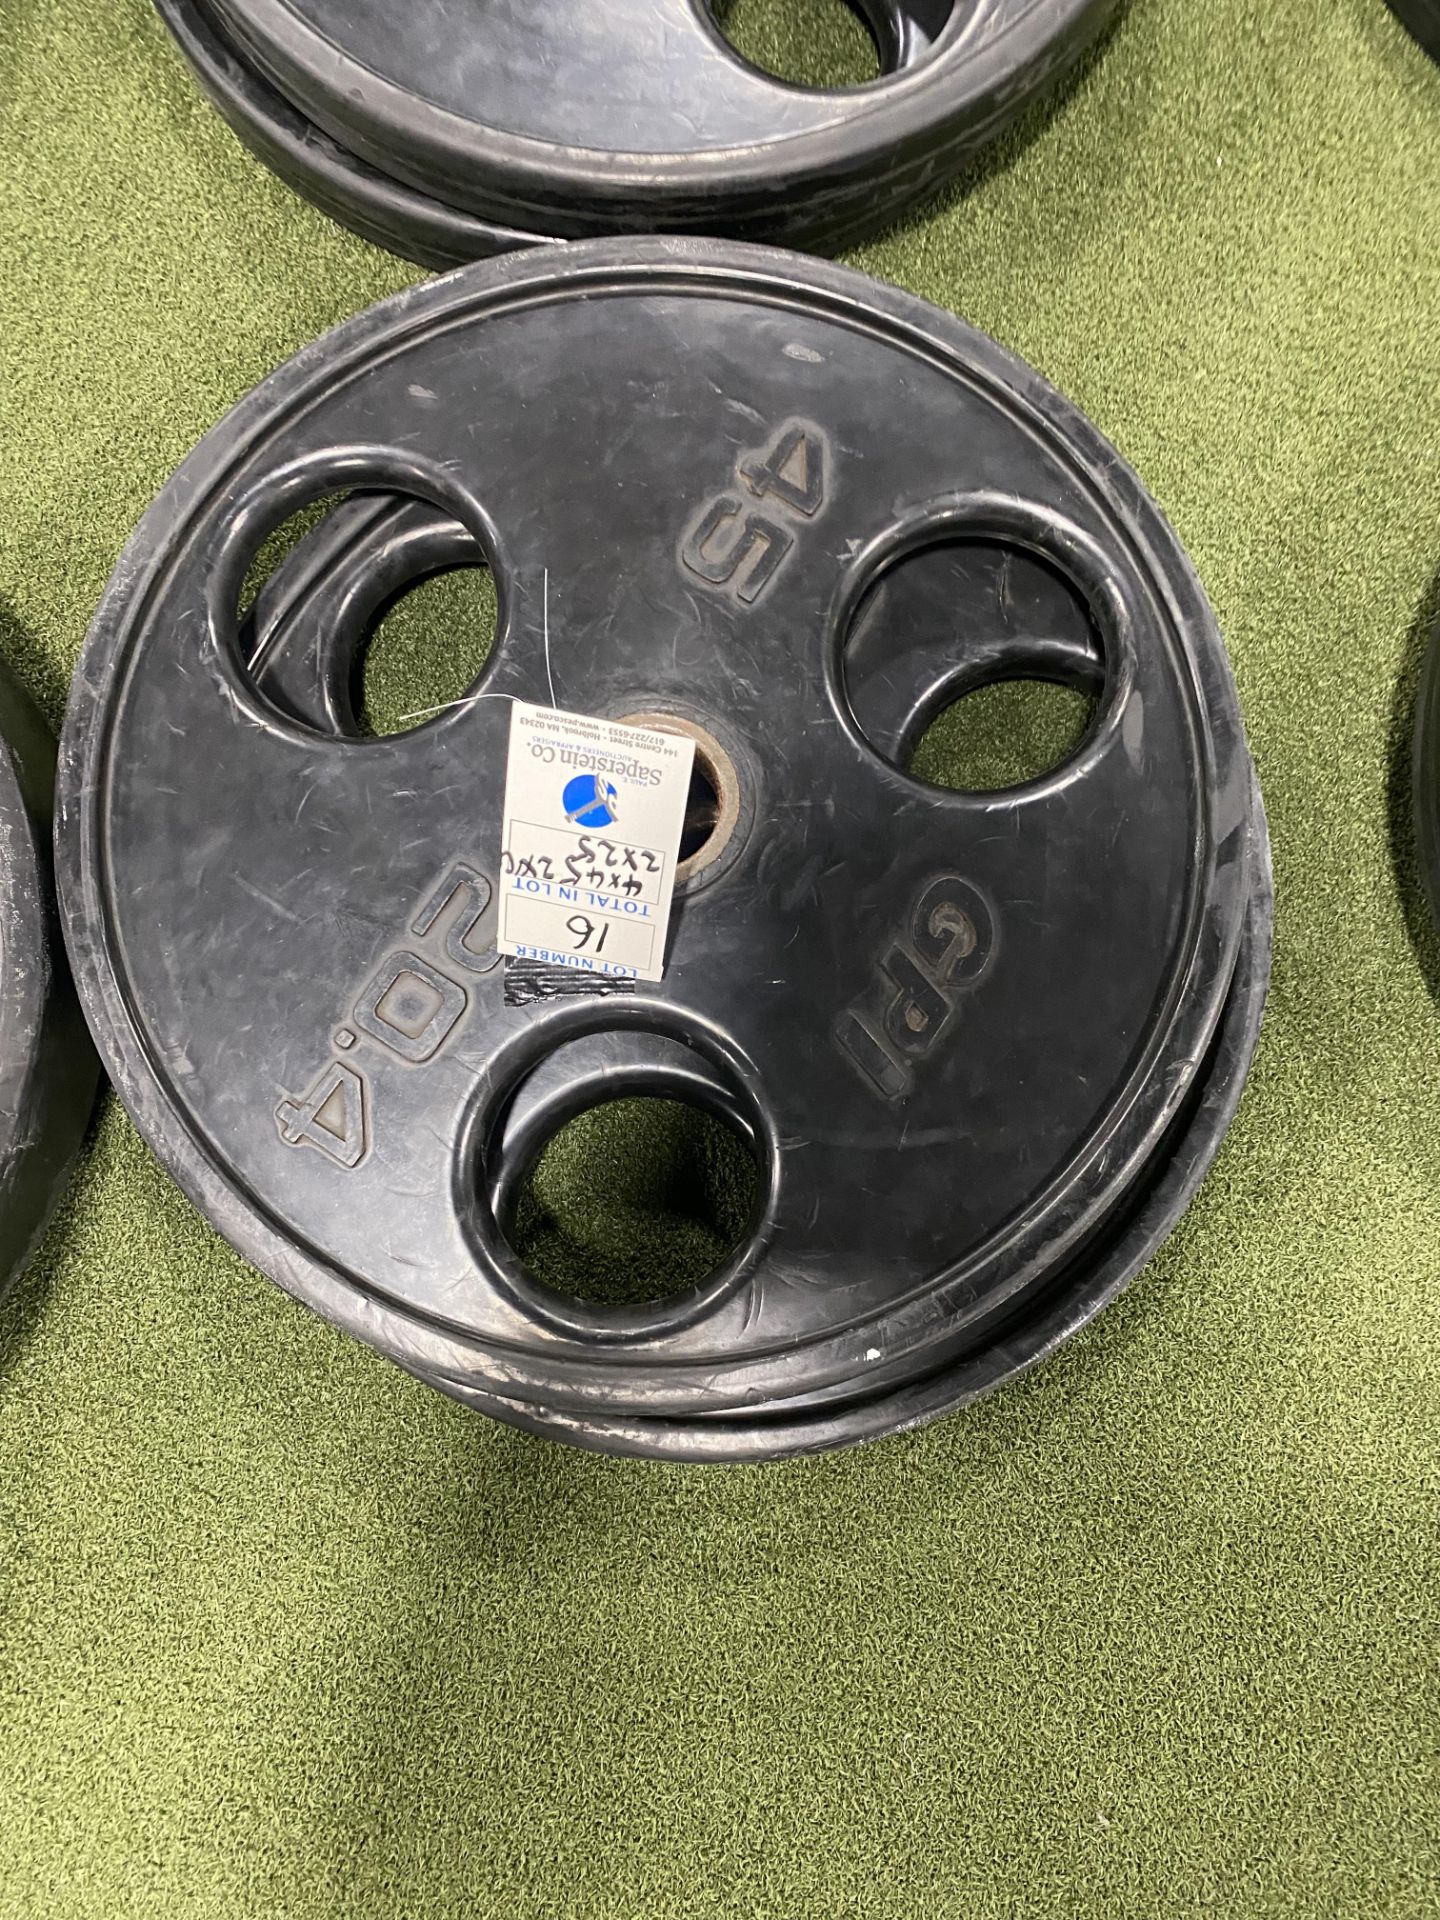 (Lot) (4) 45lb. Plates, (2) 25Lb Bumper Plates, and (2) 10lb Bumper Plates - Image 2 of 5